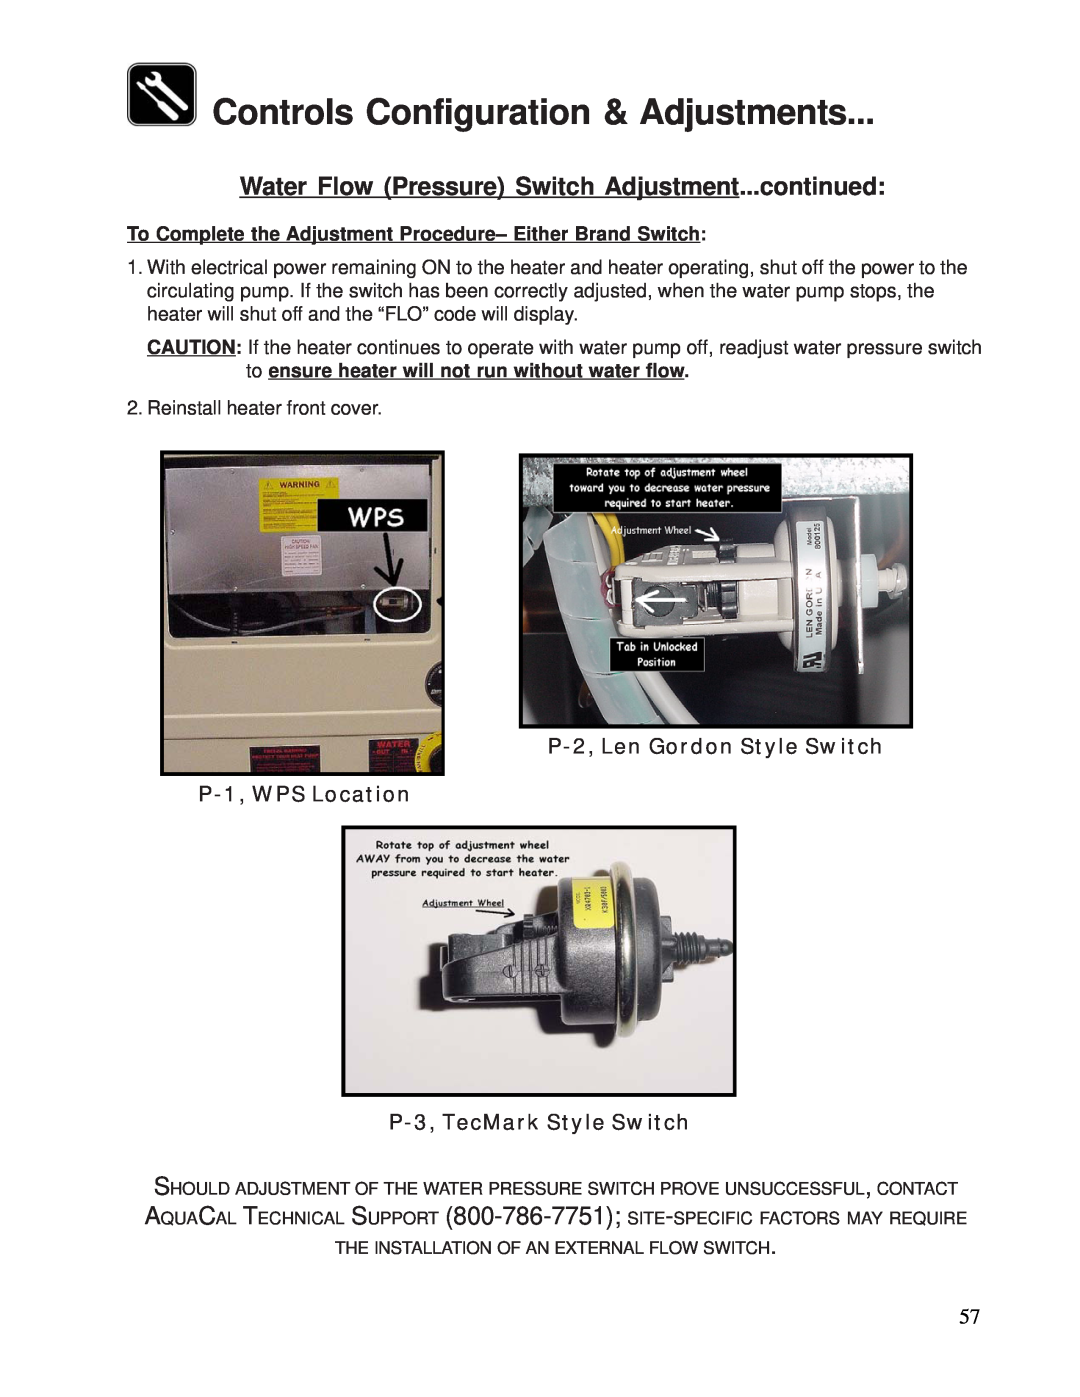 Aquacal 100 owner manual Water Flow Pressure Switch Adjustment...continued, Controls Configuration & Adjustments 